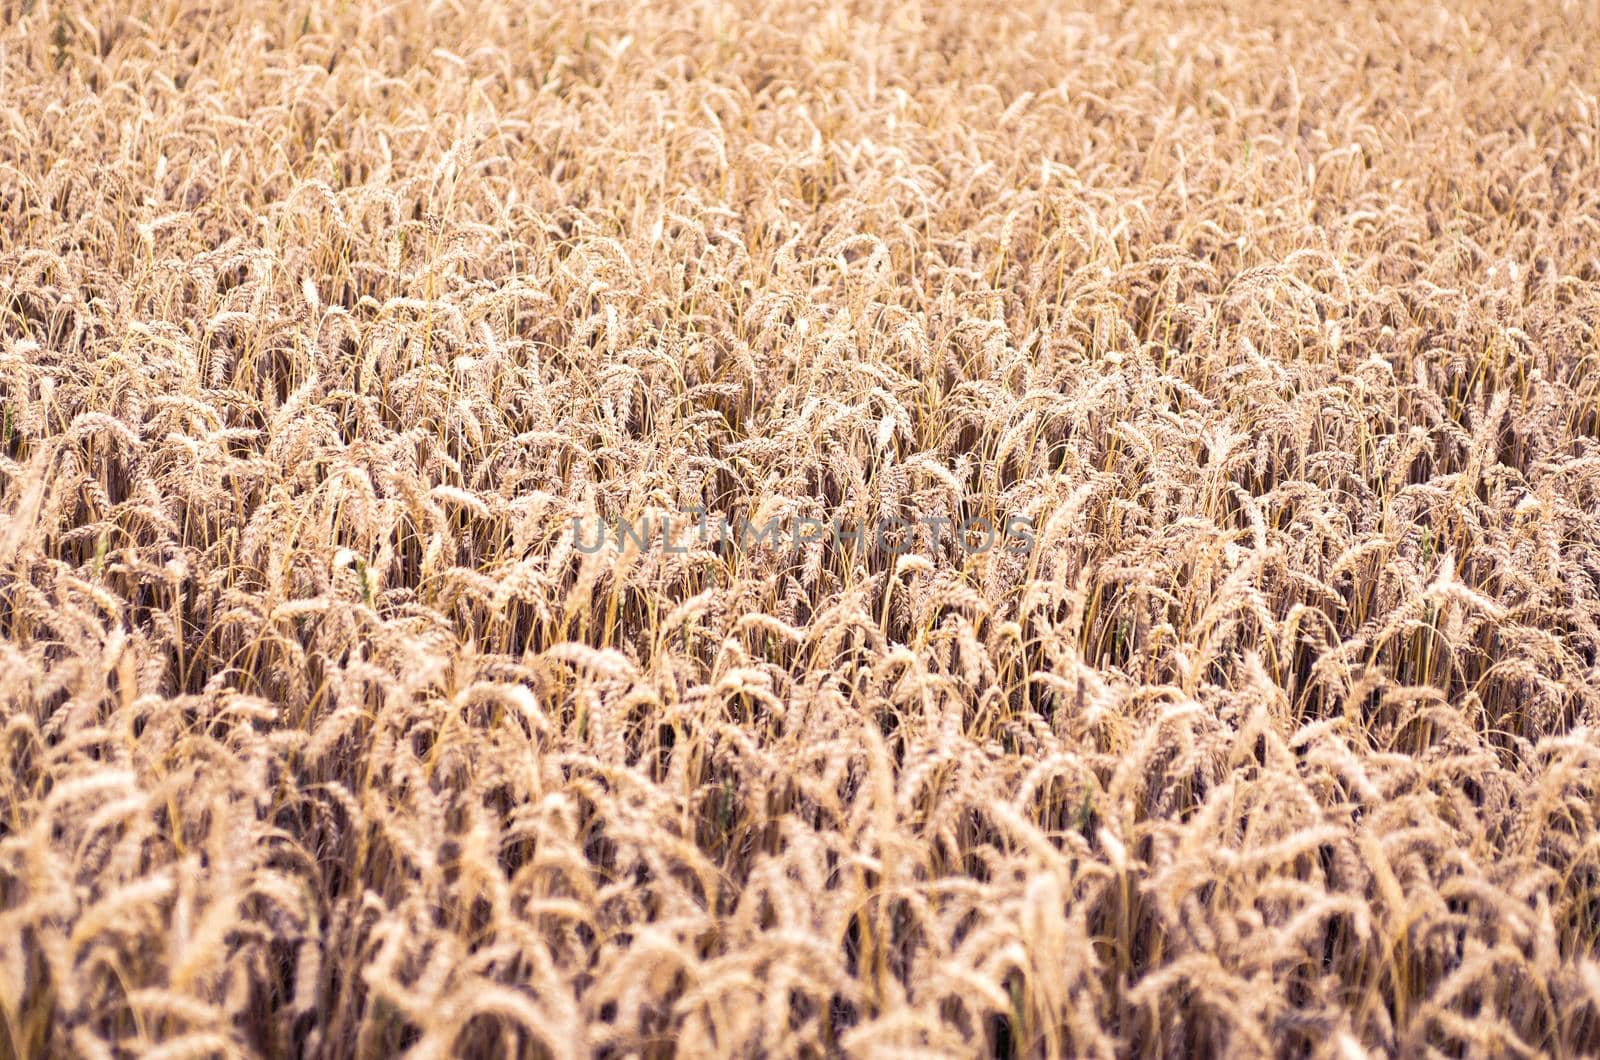 Golden rye field. Ripe grain spikelets. Cover crop and a forage crop. Agricultural concept. Summer rural scenery. Background of ripening ears of wheat field. Rich harvest concept. Grain backdrop with copy spac by KajaNi